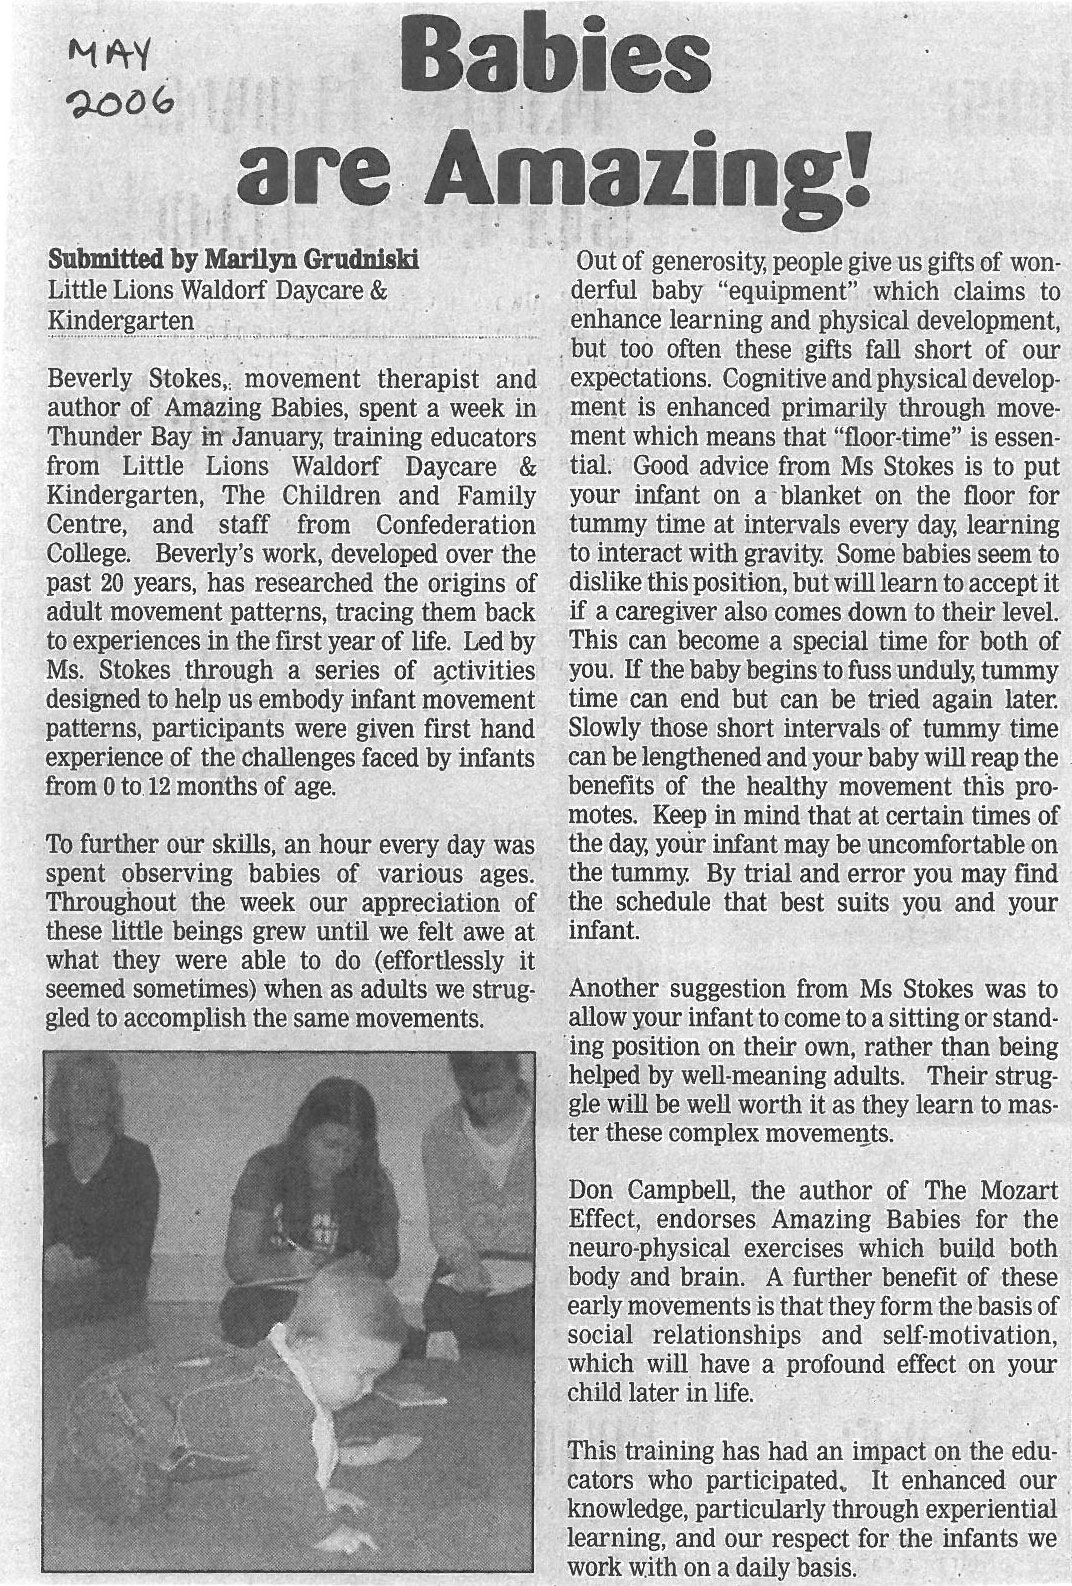 Article, May 2006 Chronicle Journal